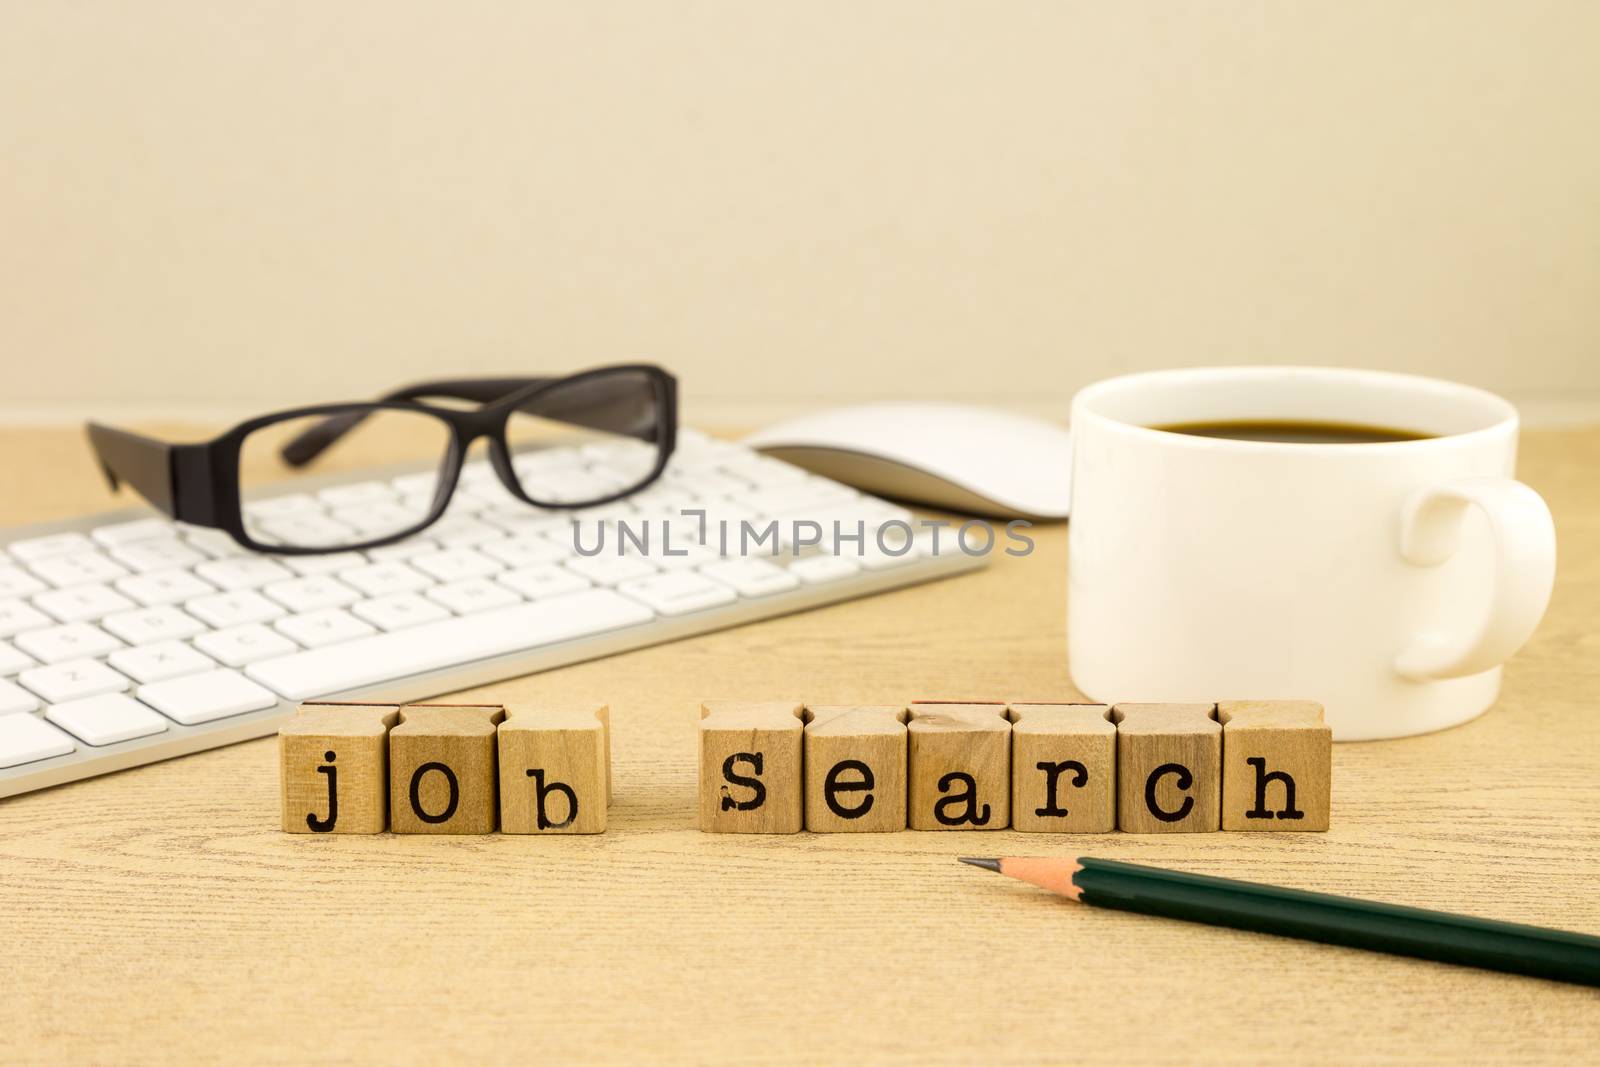 Looking for employment with job search by vinnstock